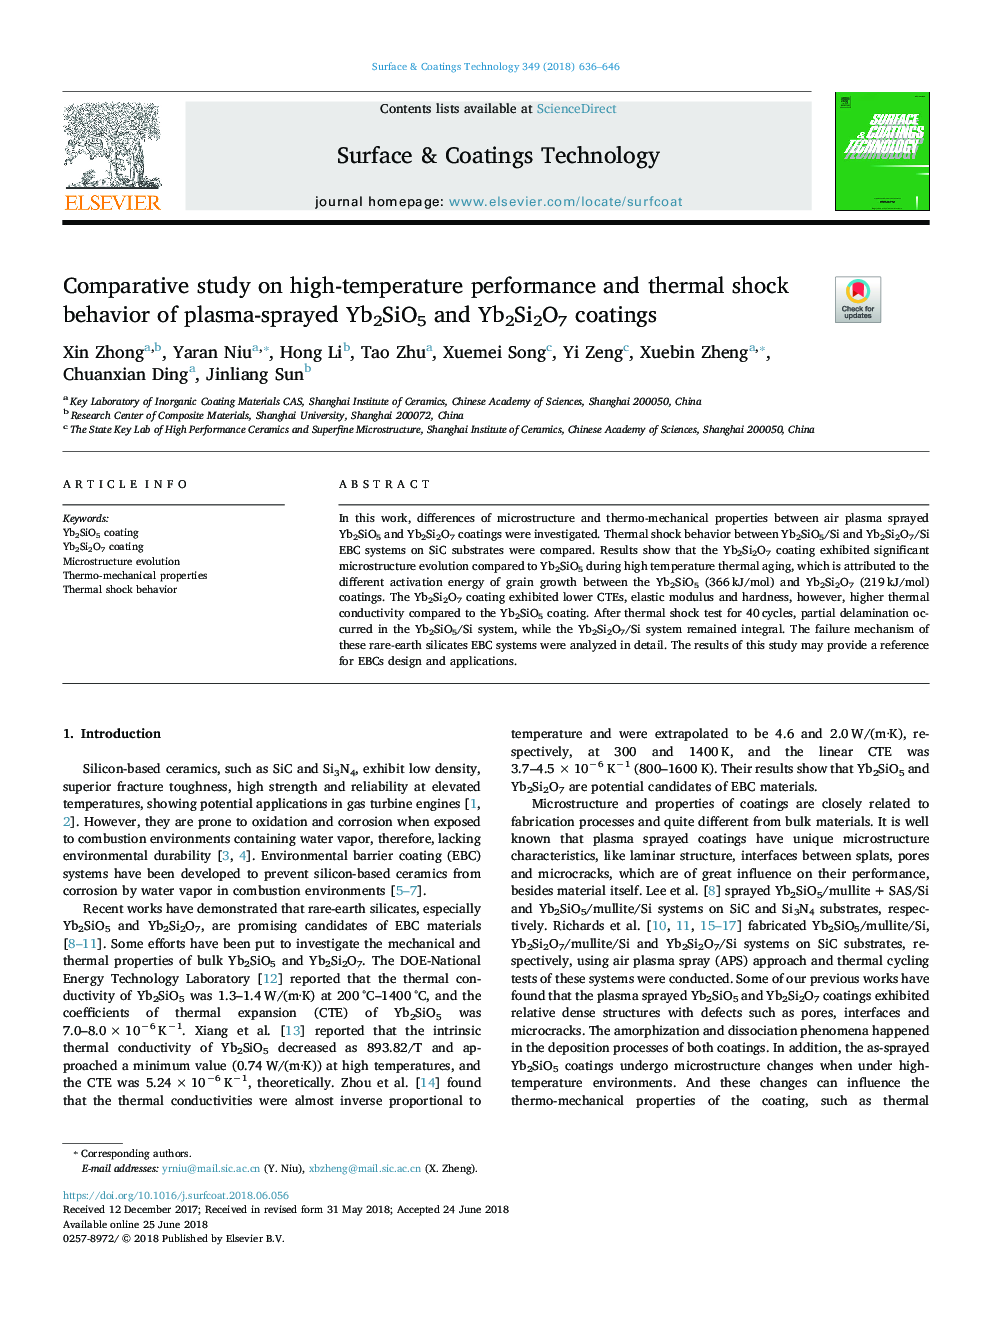 Comparative study on high-temperature performance and thermal shock behavior of plasma-sprayed Yb2SiO5 and Yb2Si2O7 coatings